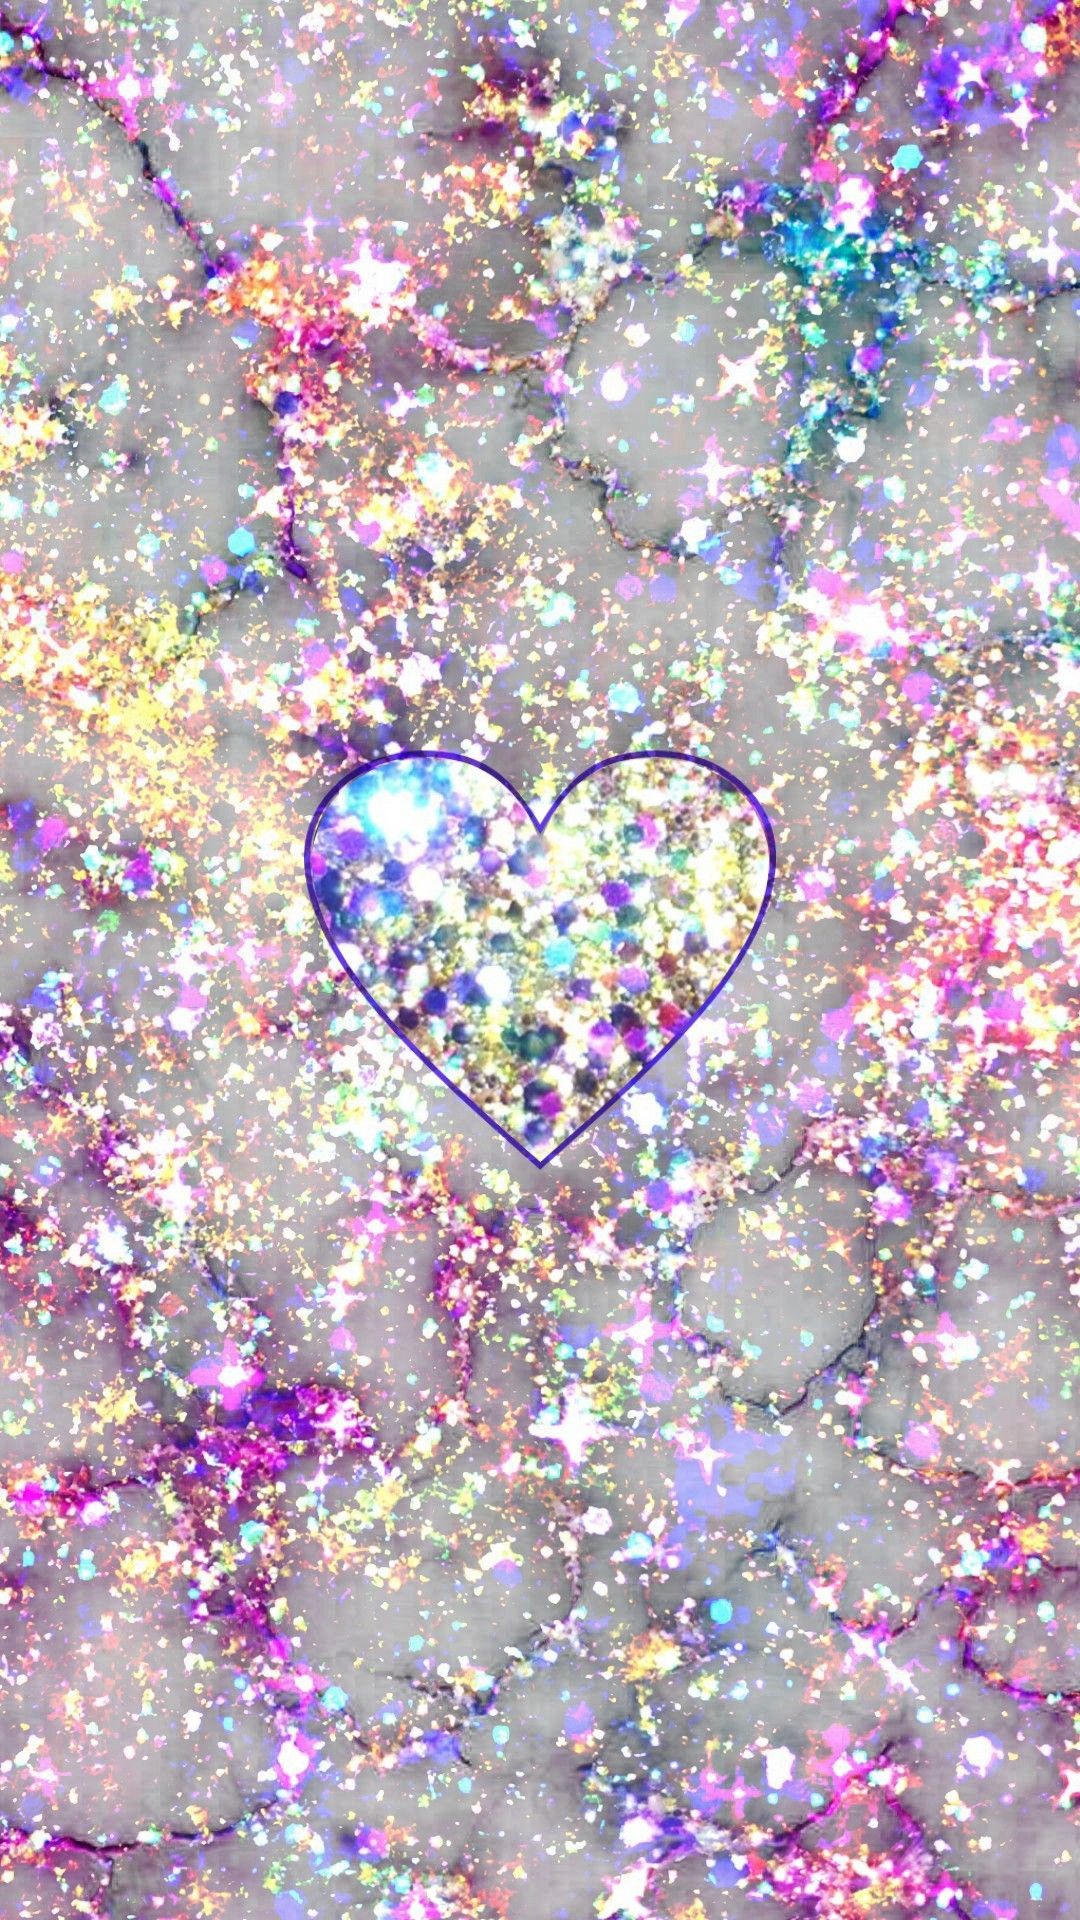 1080x1920 Glittery Marble Heart, made by me #purple #sparkly #wallpapers #backgrounds  #sparkles #rainbow #colors #colorful #art #marble #textures